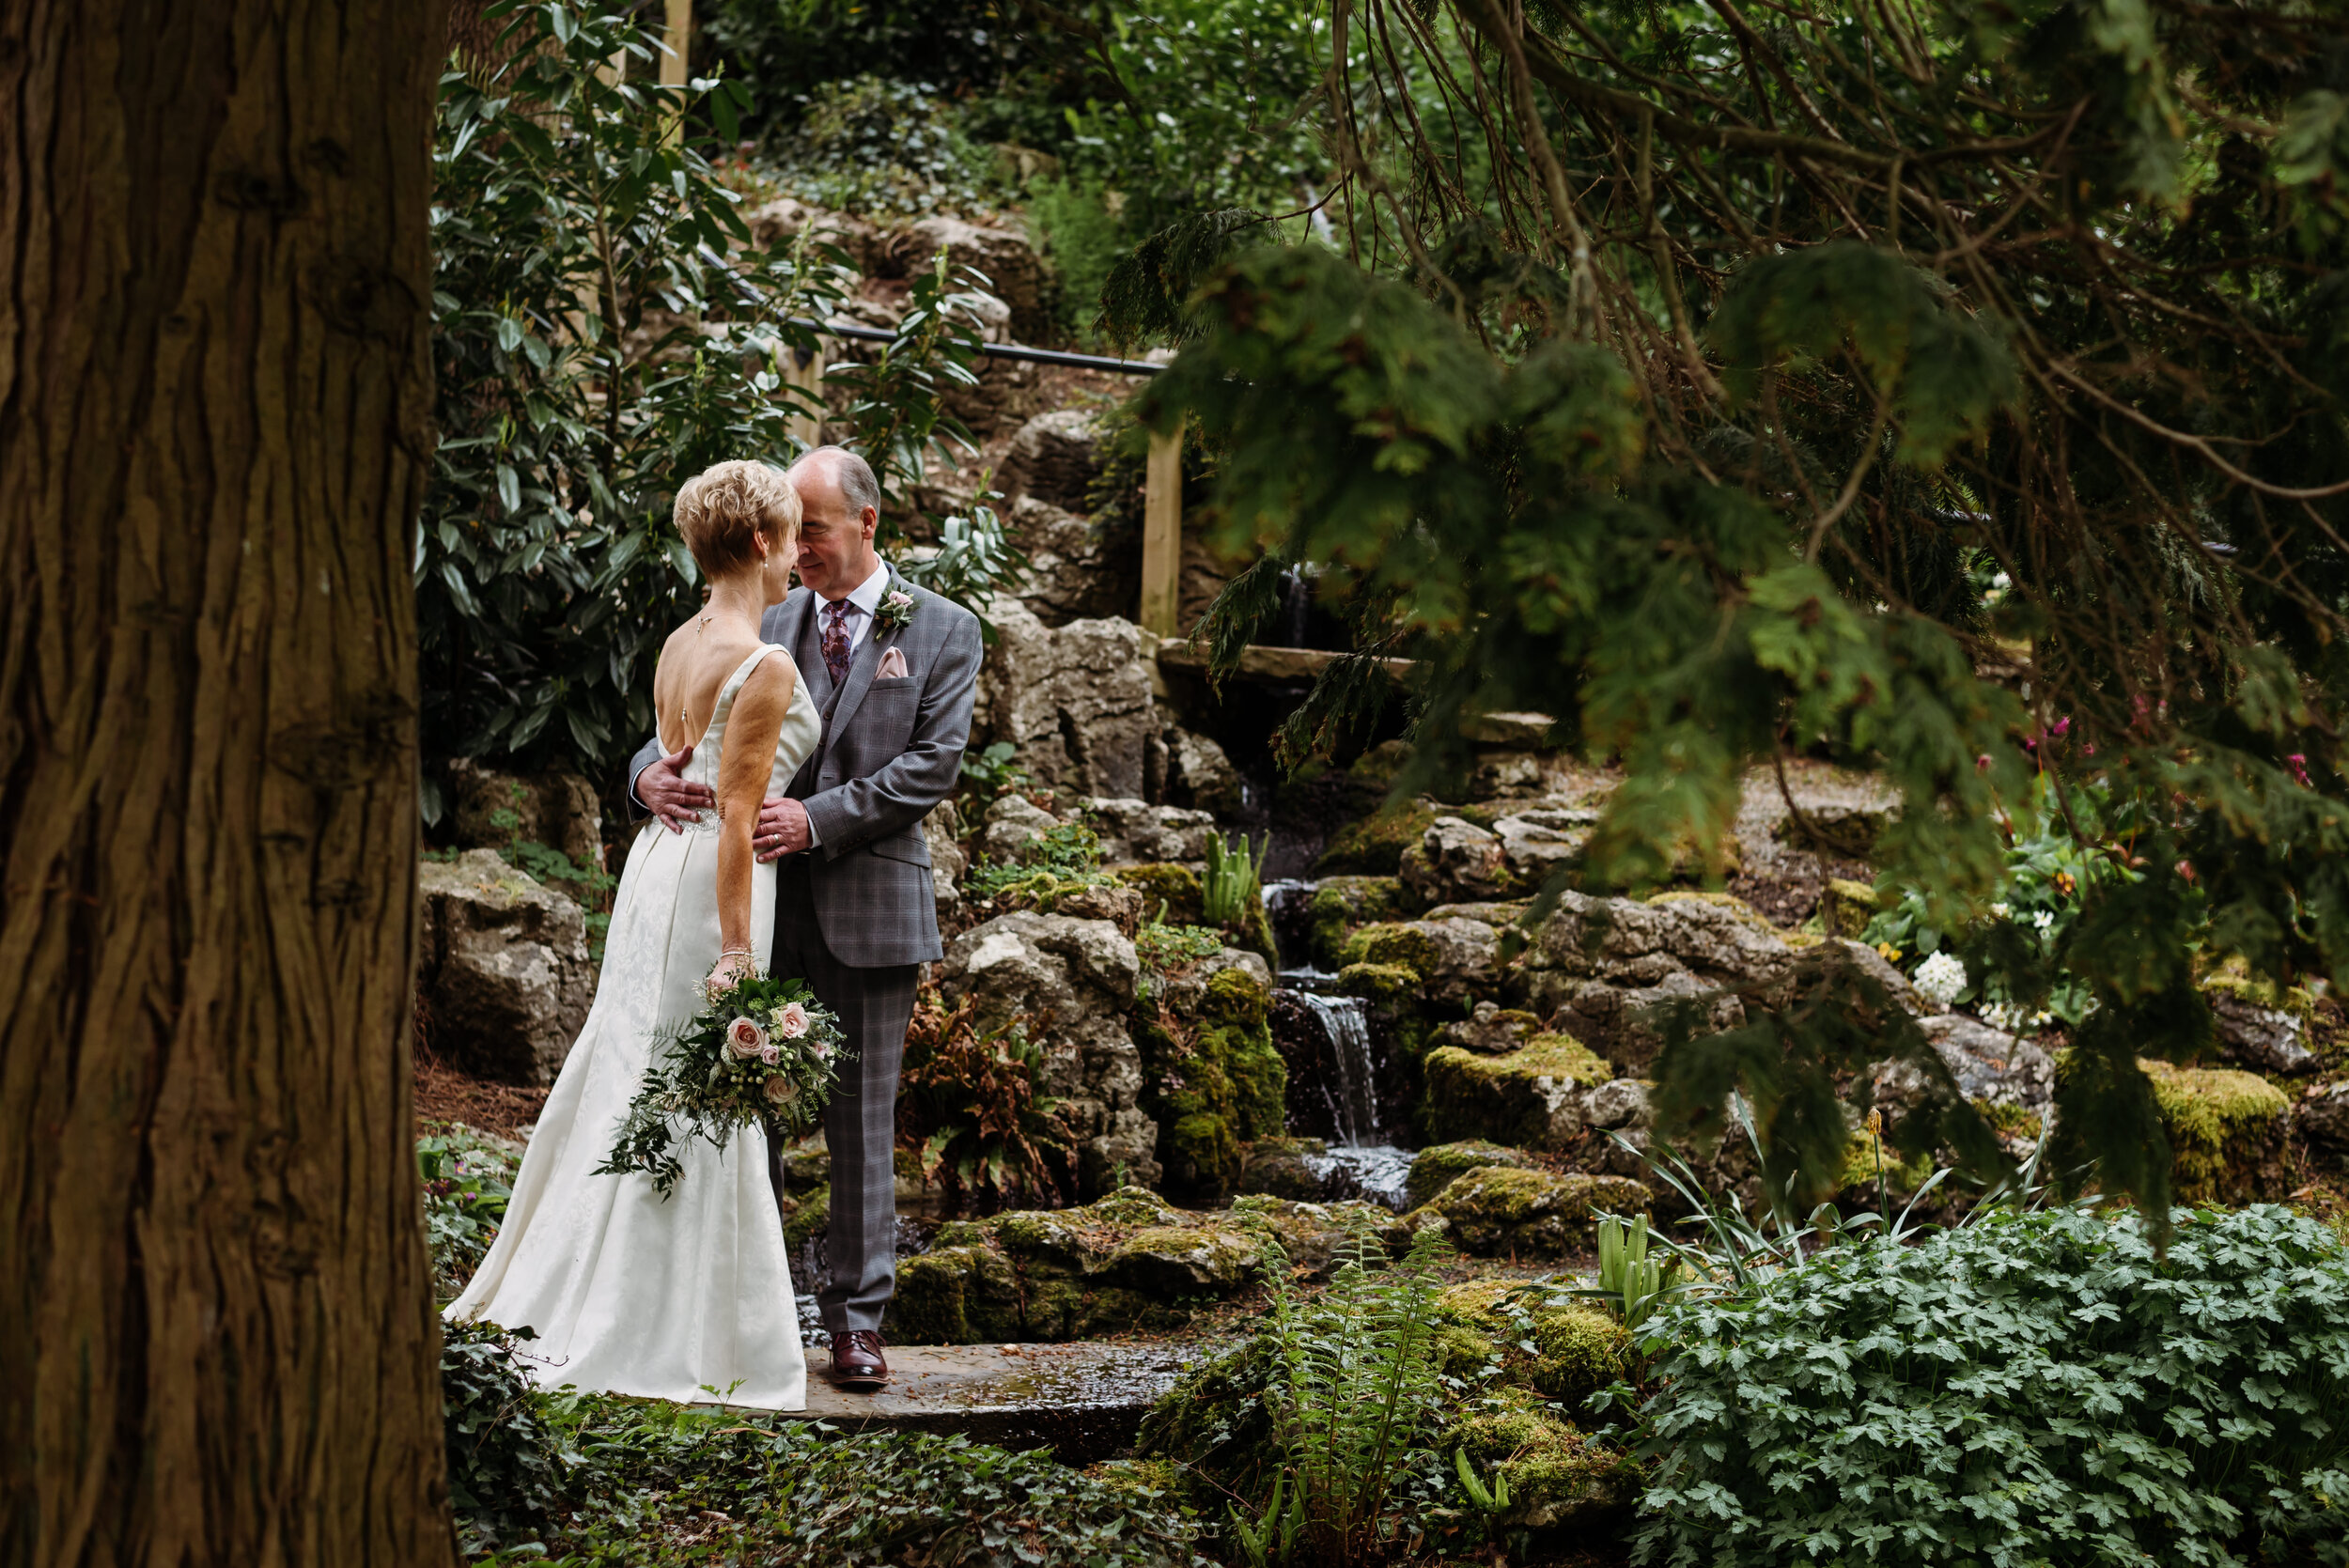 Bride and groom in the secret garden at Mitton Hall